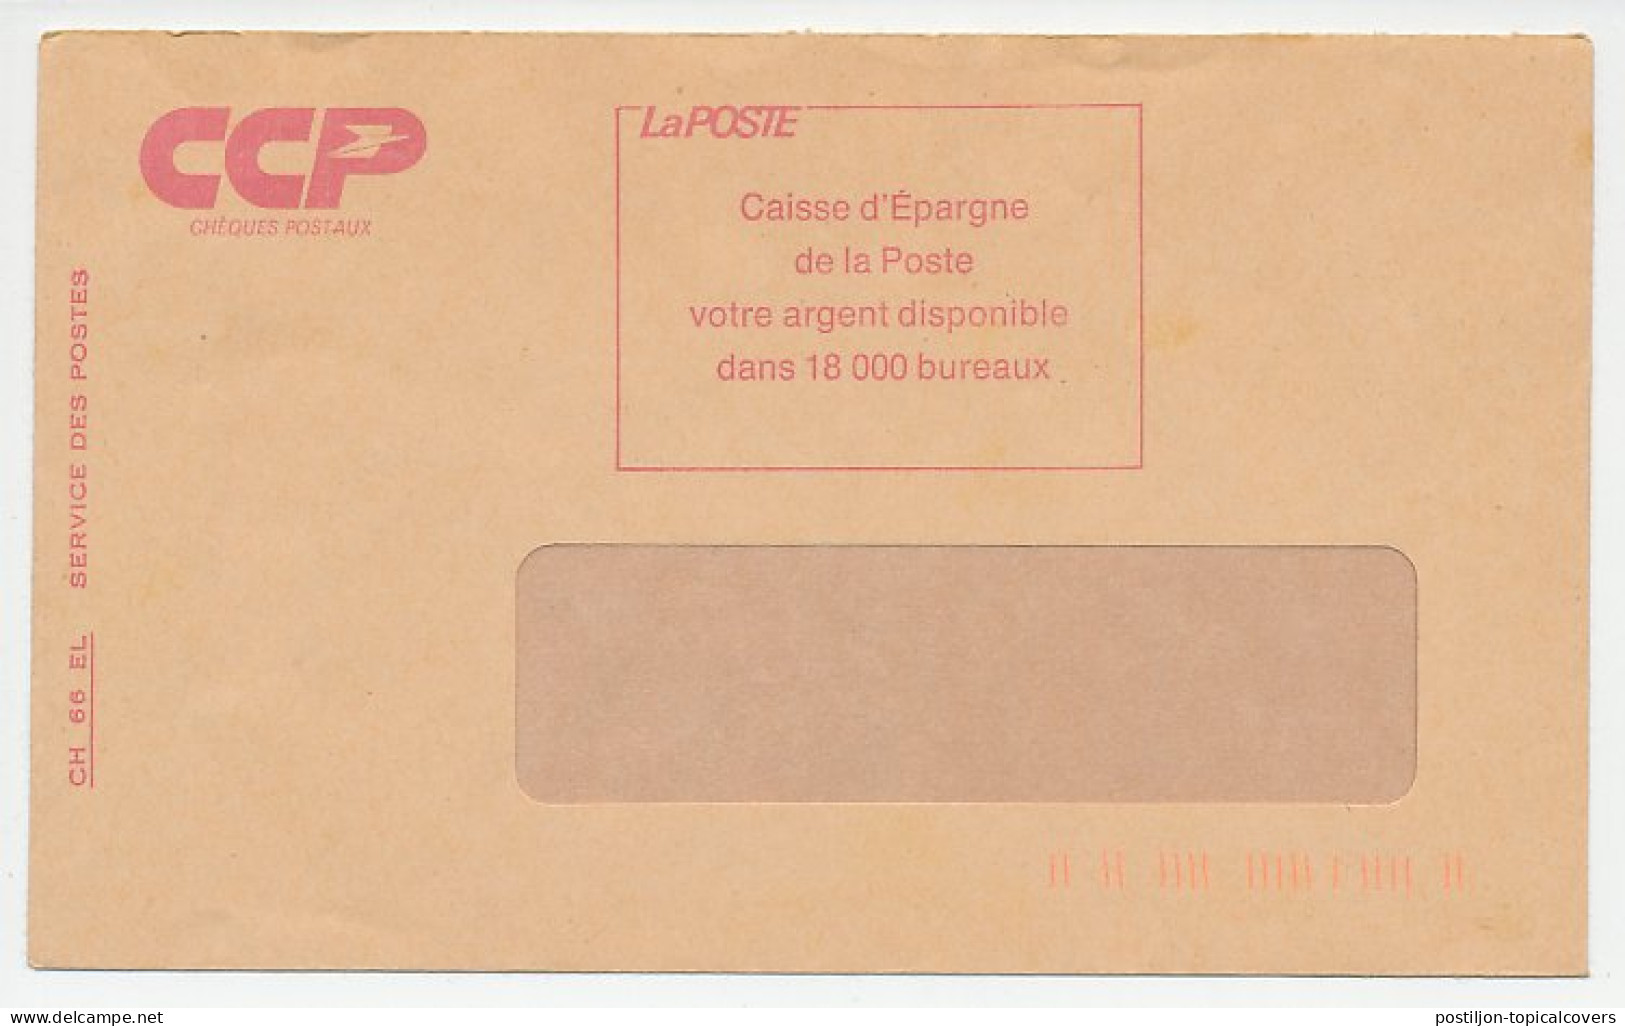 Postal Cheque Cover France Photo Print - For Free - Photography